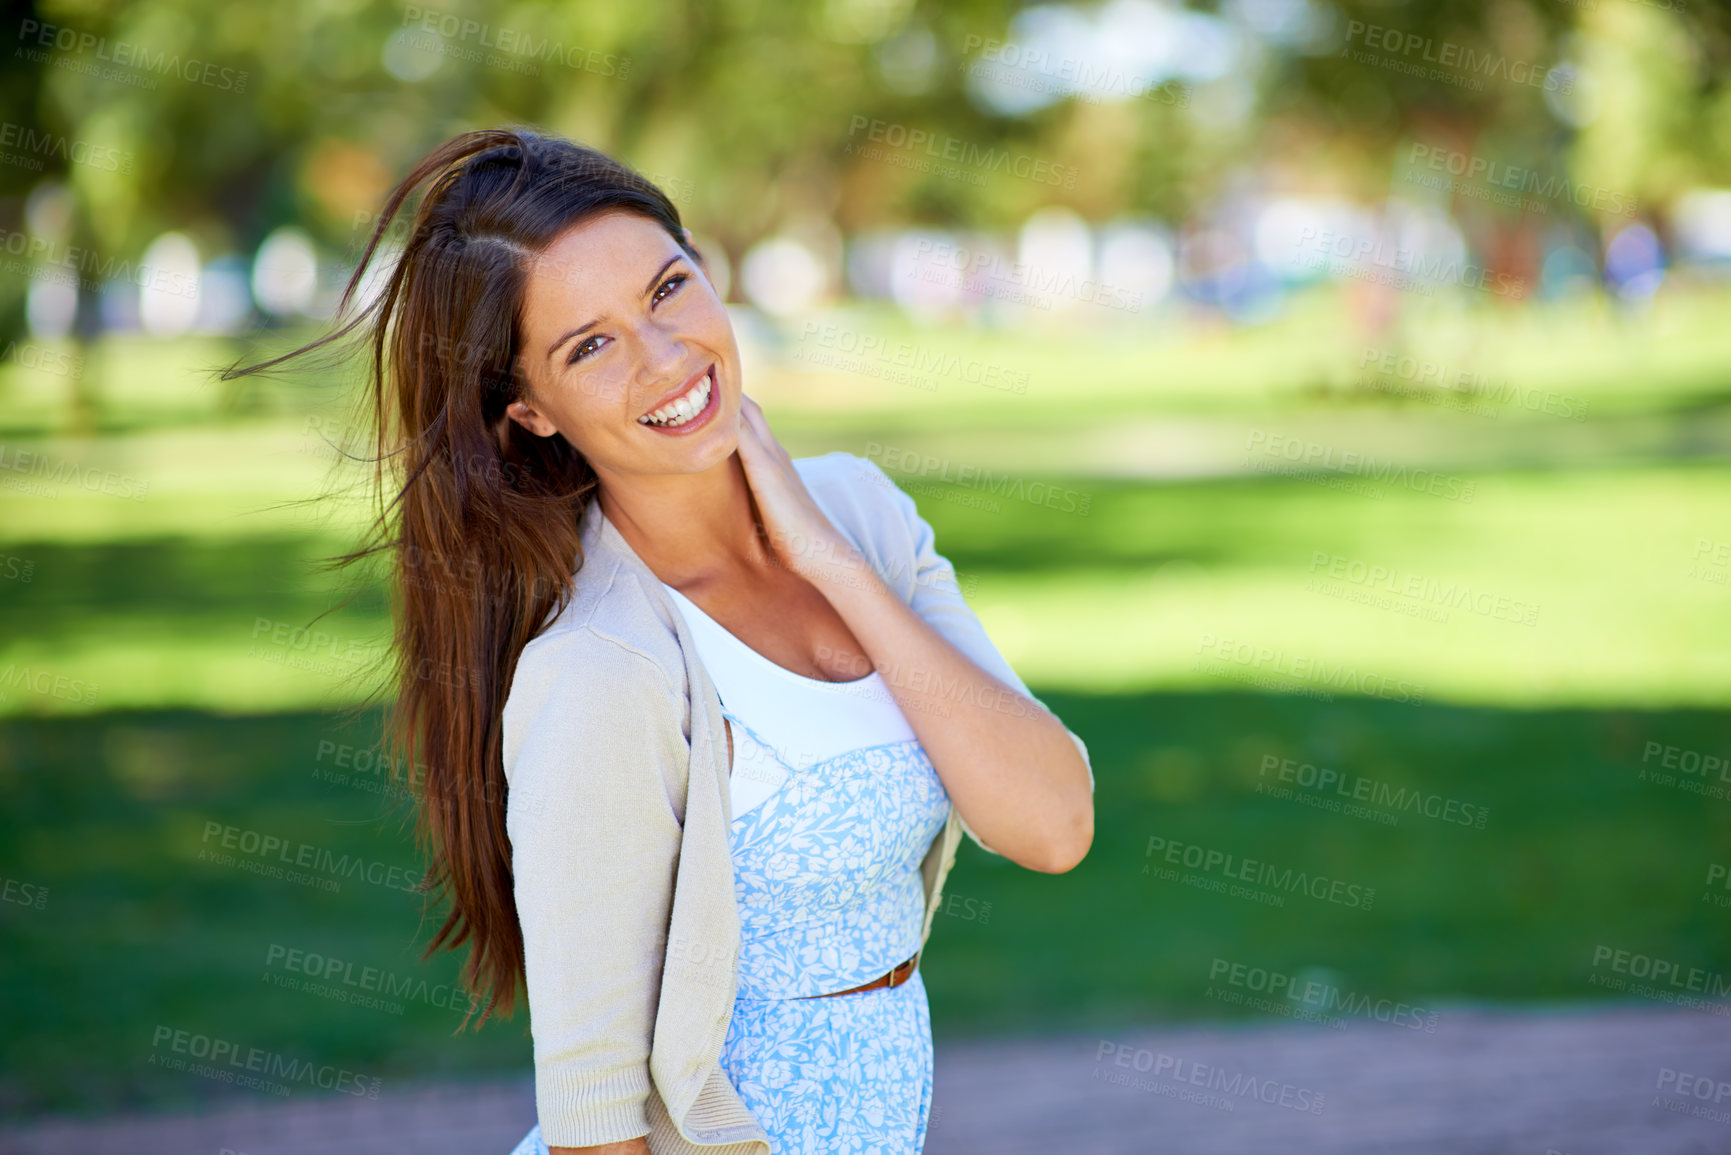 Buy stock photo Portrait of a beautiful young woman enjoying a day at the park